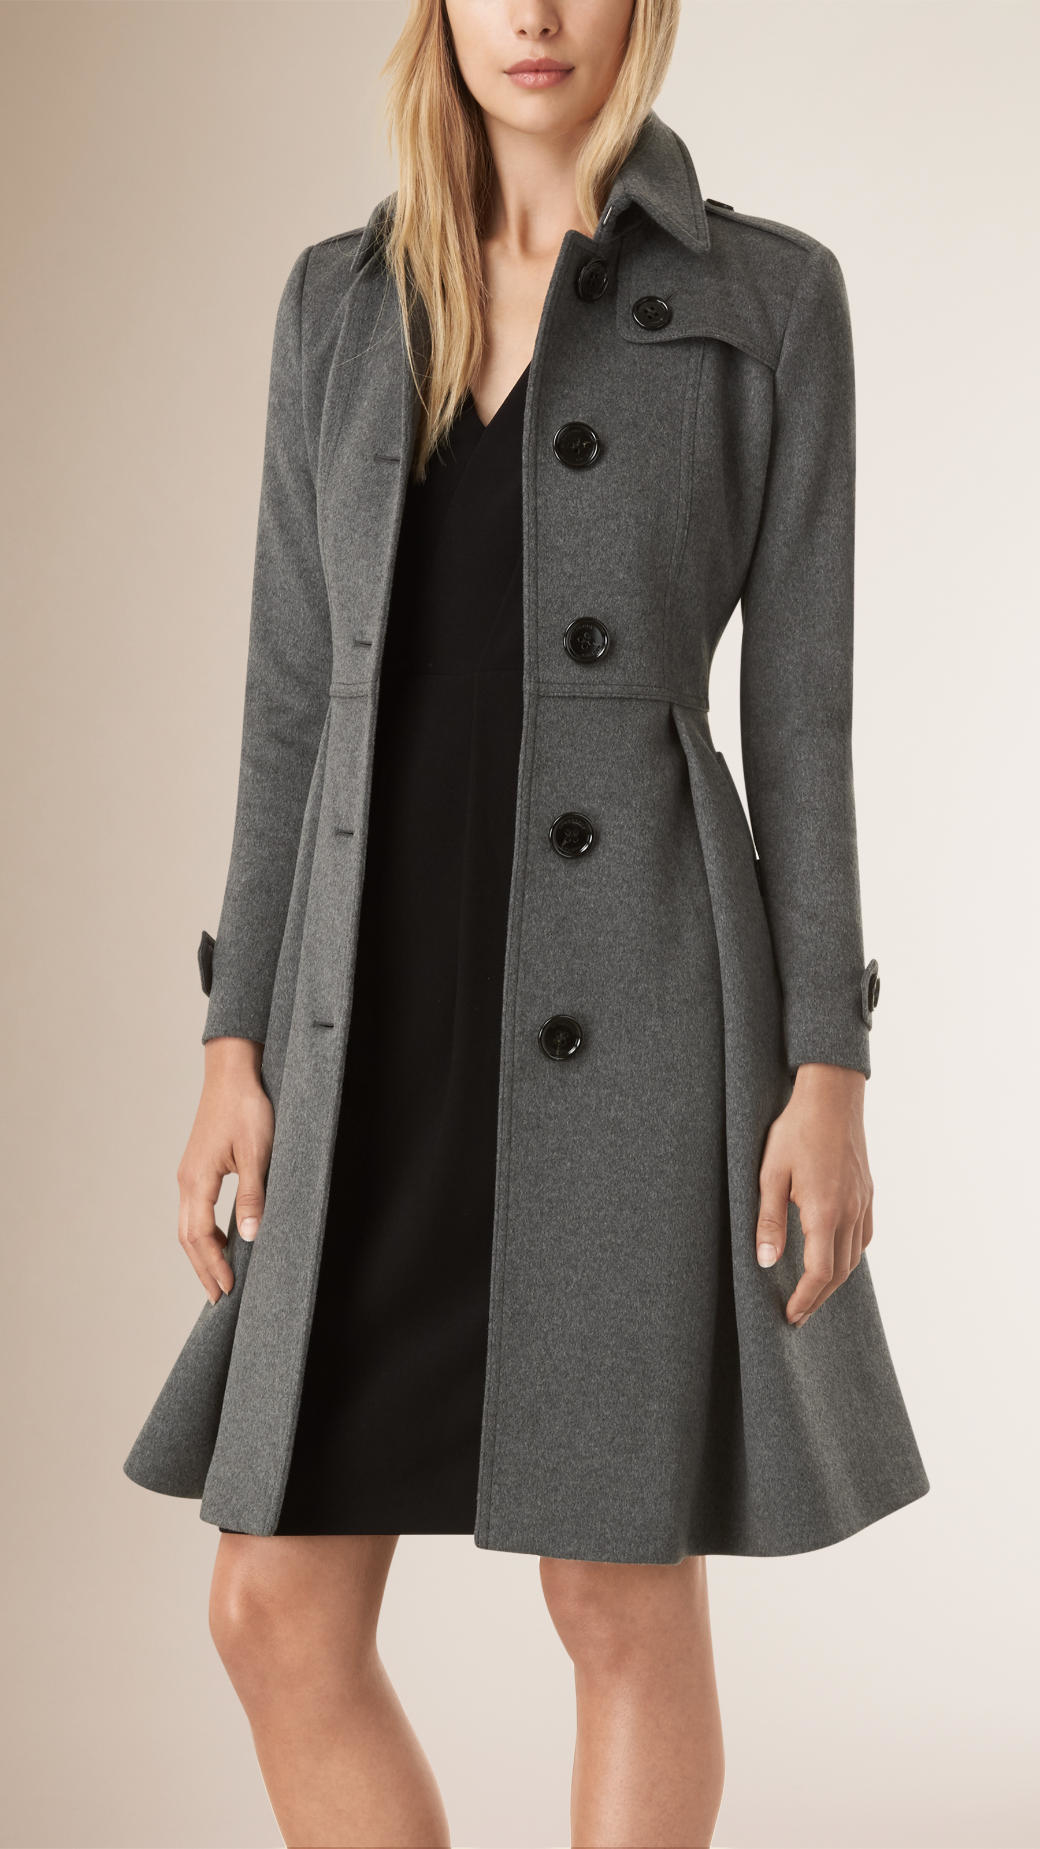 Lyst - Burberry Skirted Wool Cashmere Coat in Gray